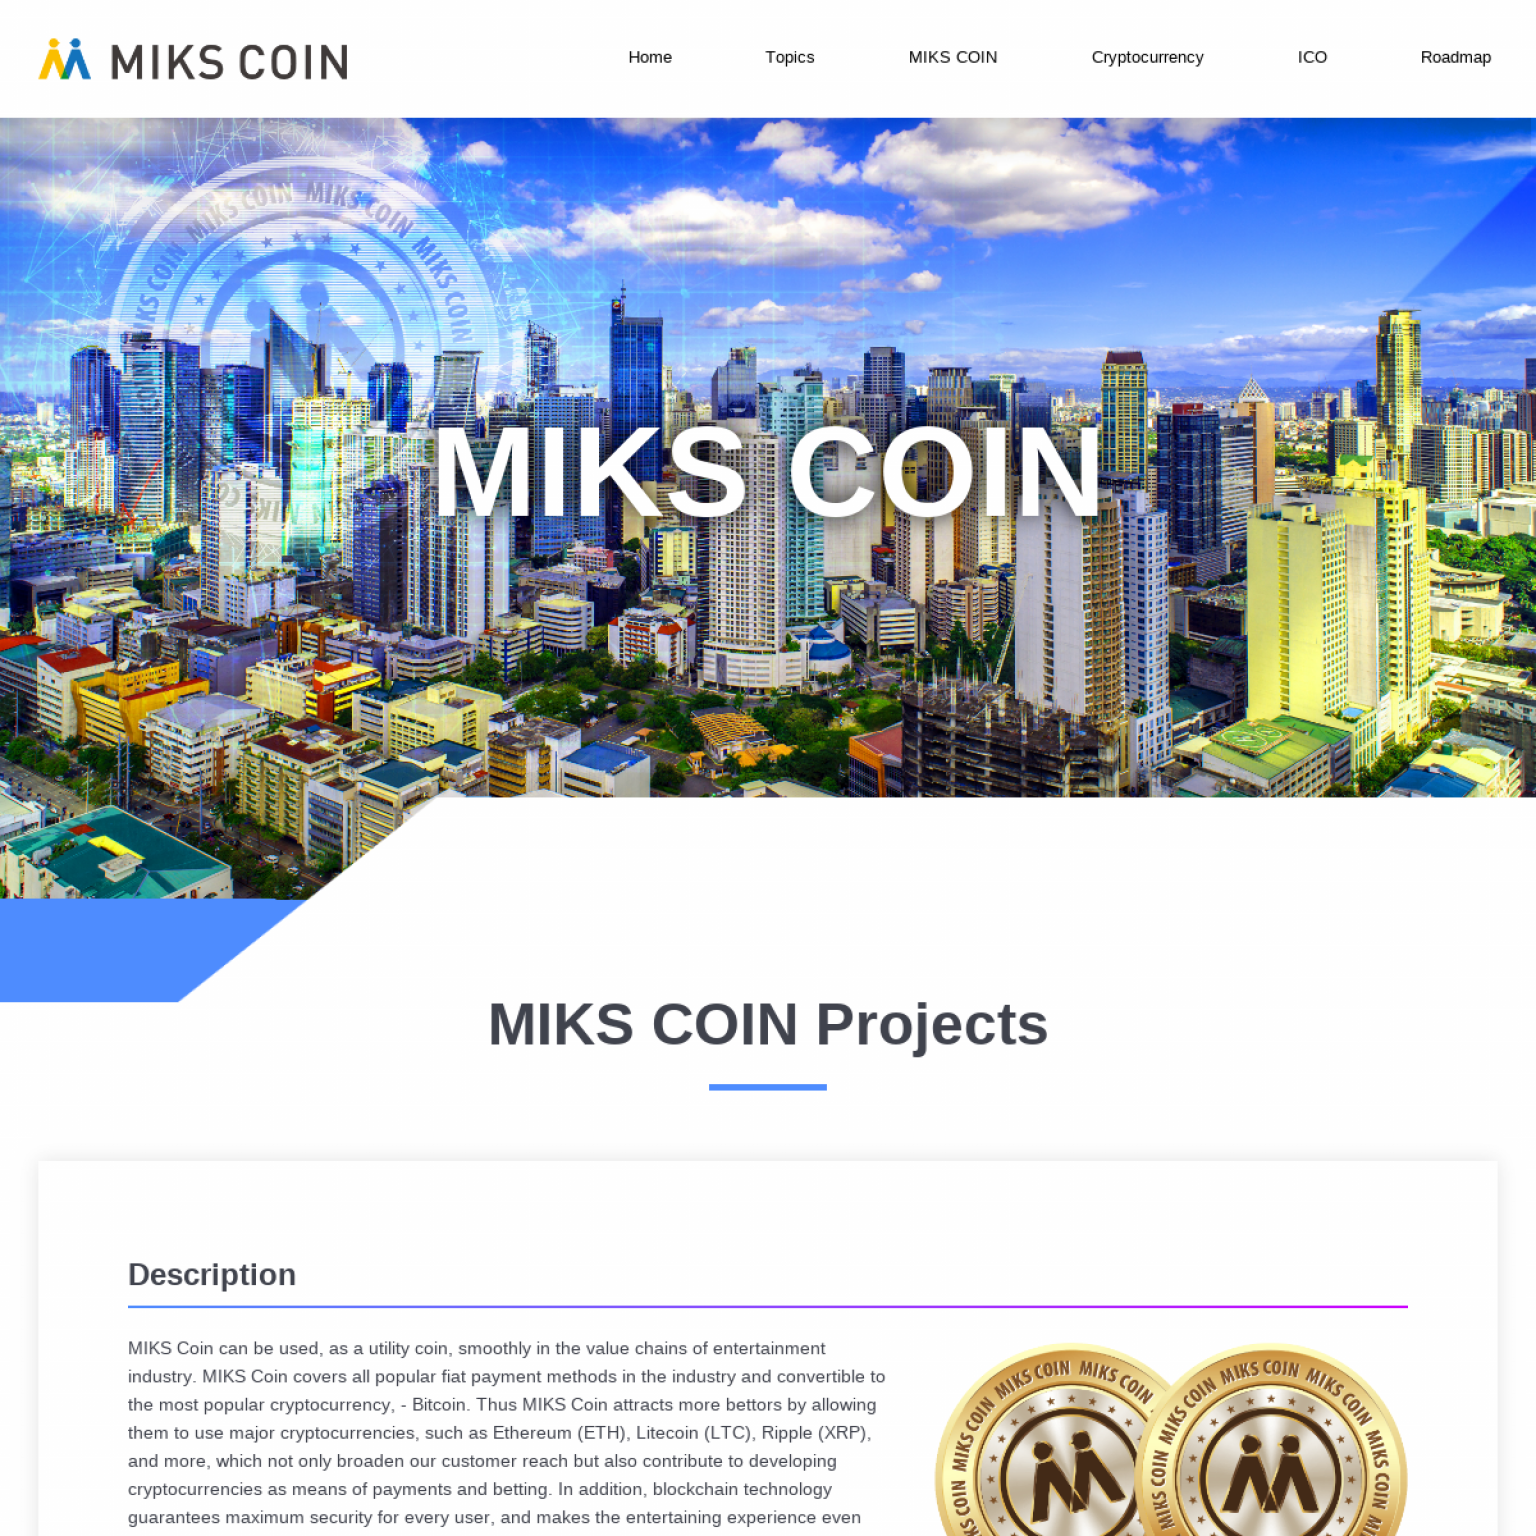 MIKS Coin IEO